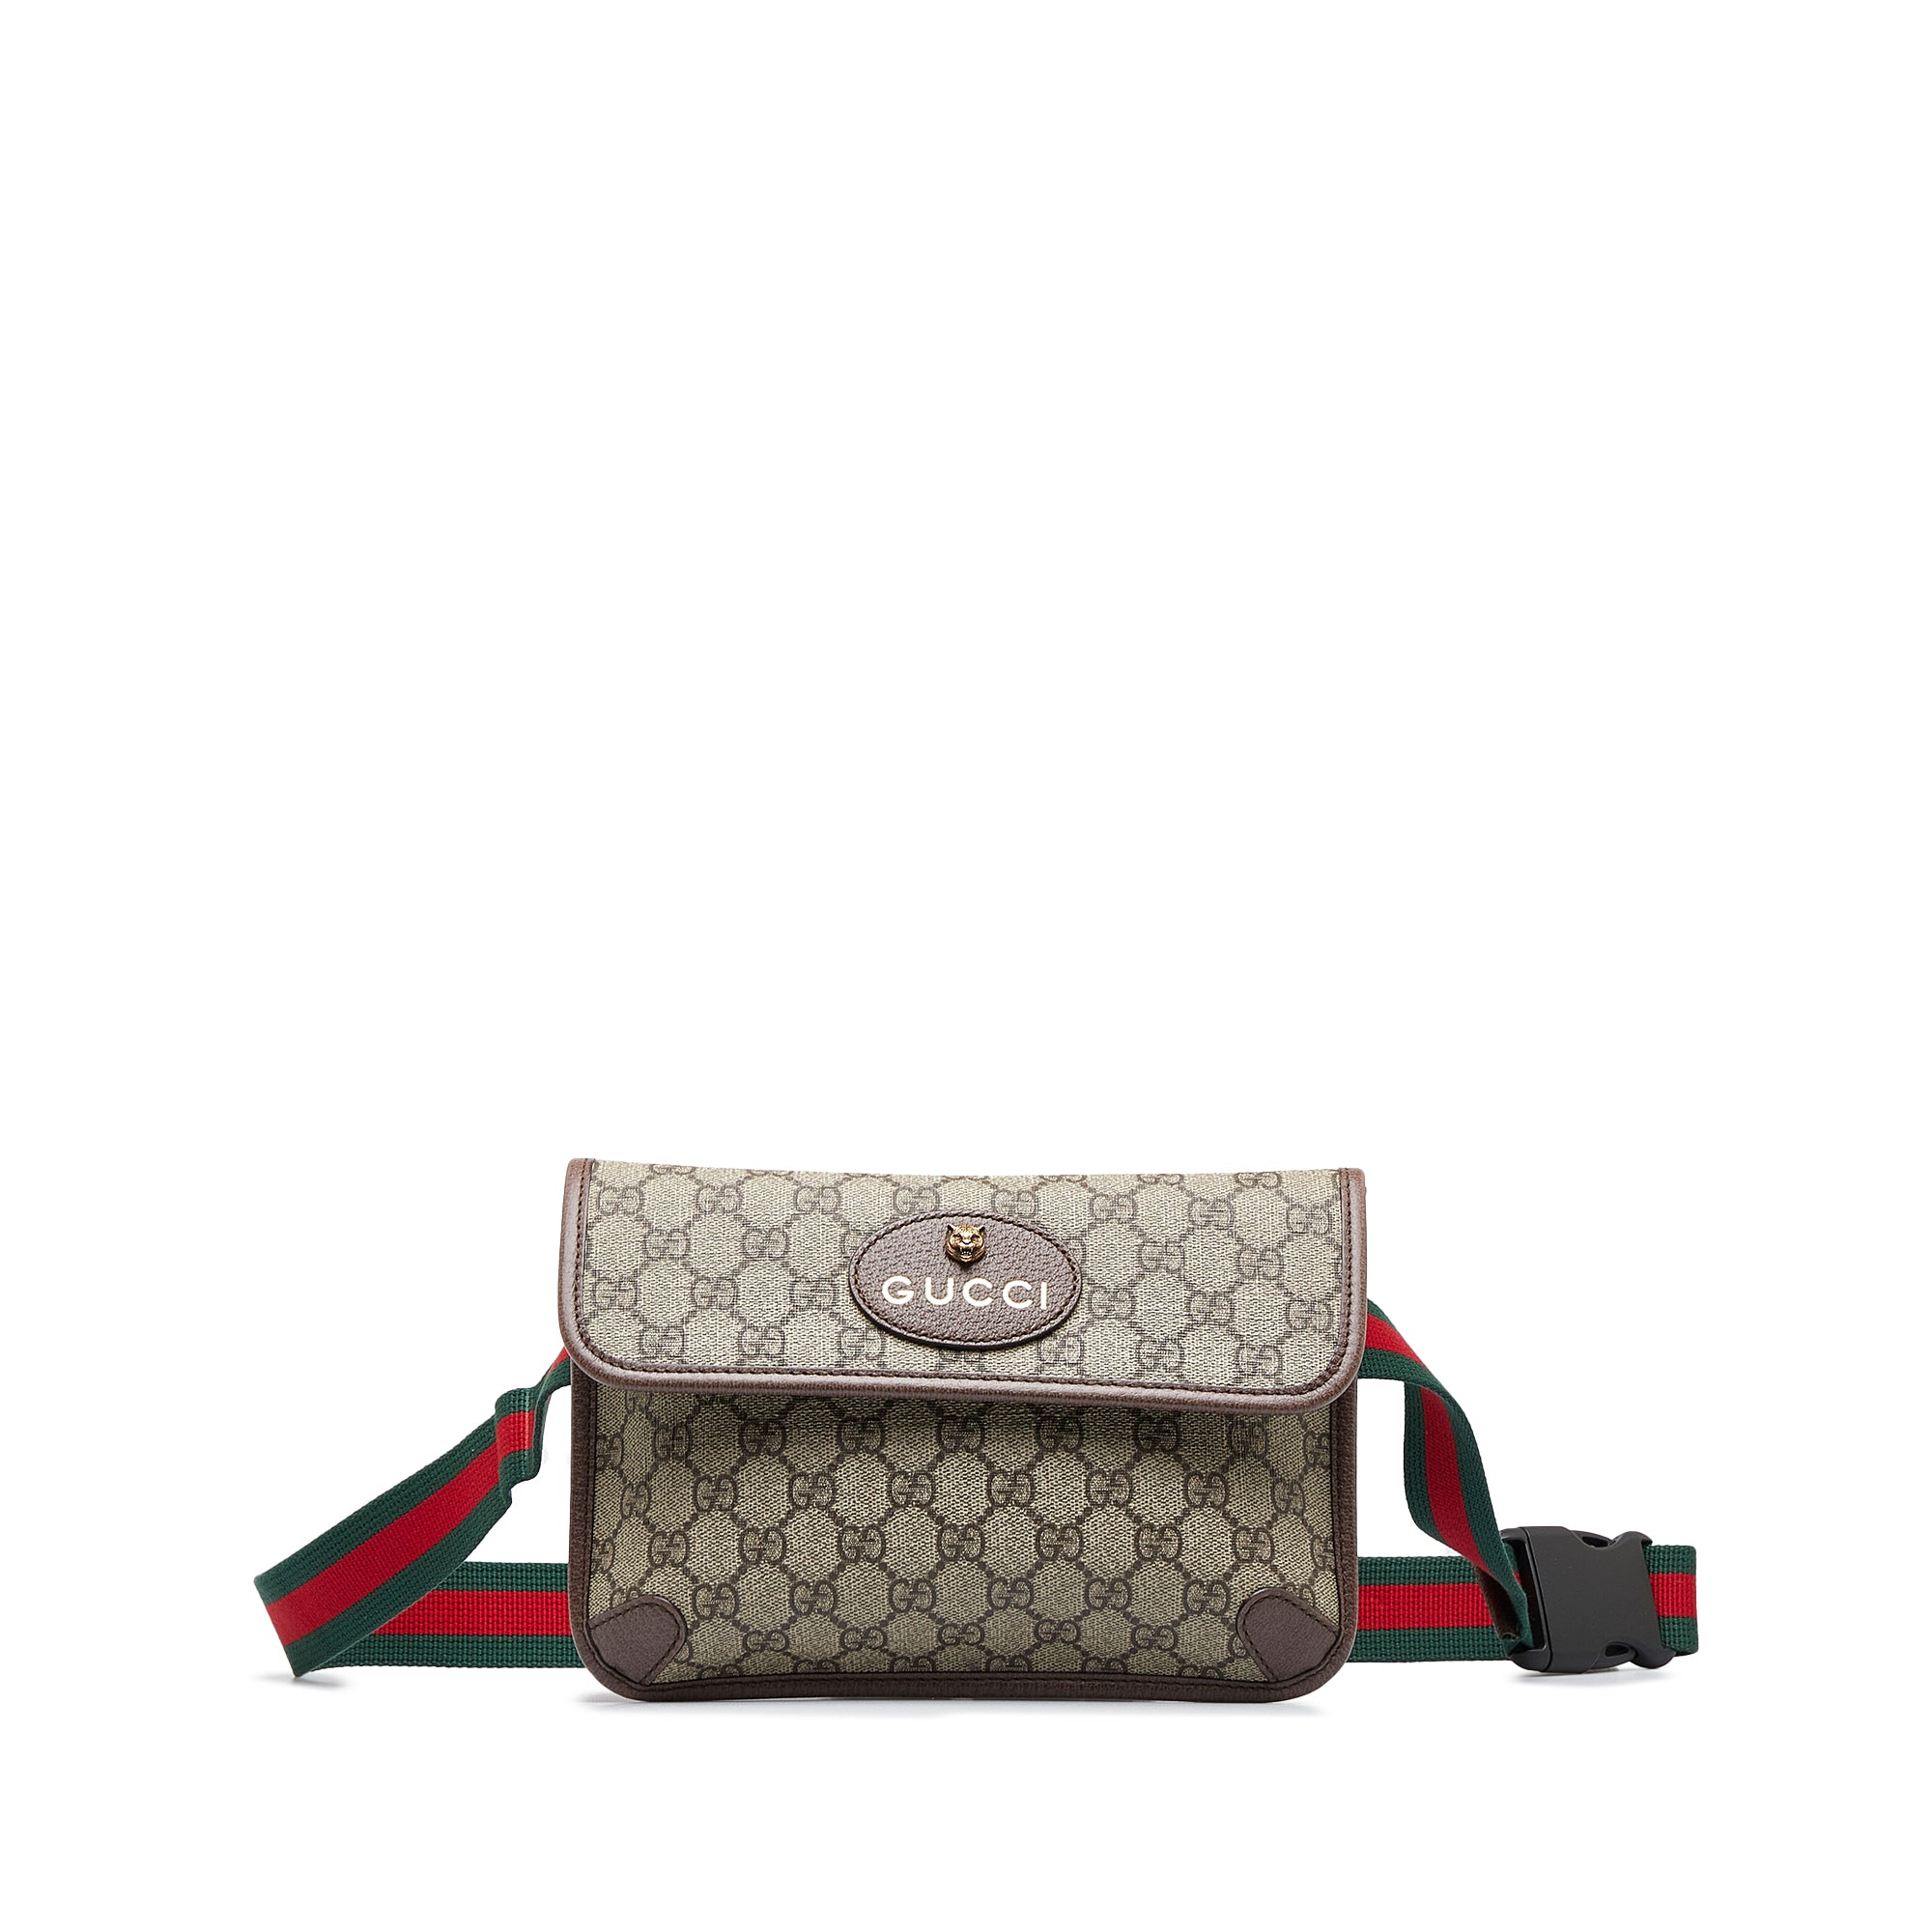 Authenticated Used Gucci Waist Pouch Body Bag GUCCI Backpack Belt